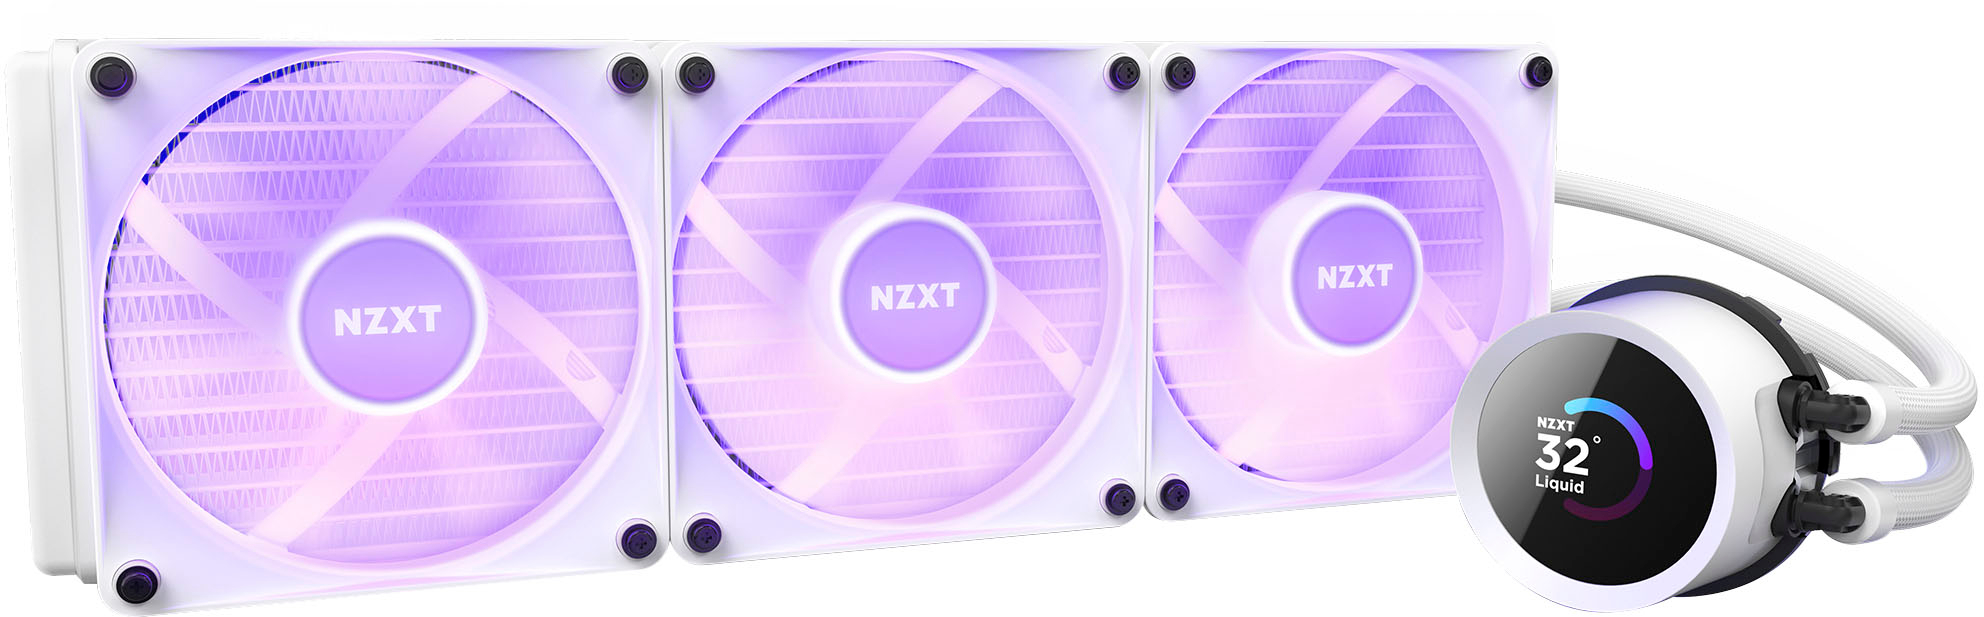 NZXT Kraken 360 RGB 360mm AIO Liquid Cooler with LCD Display and